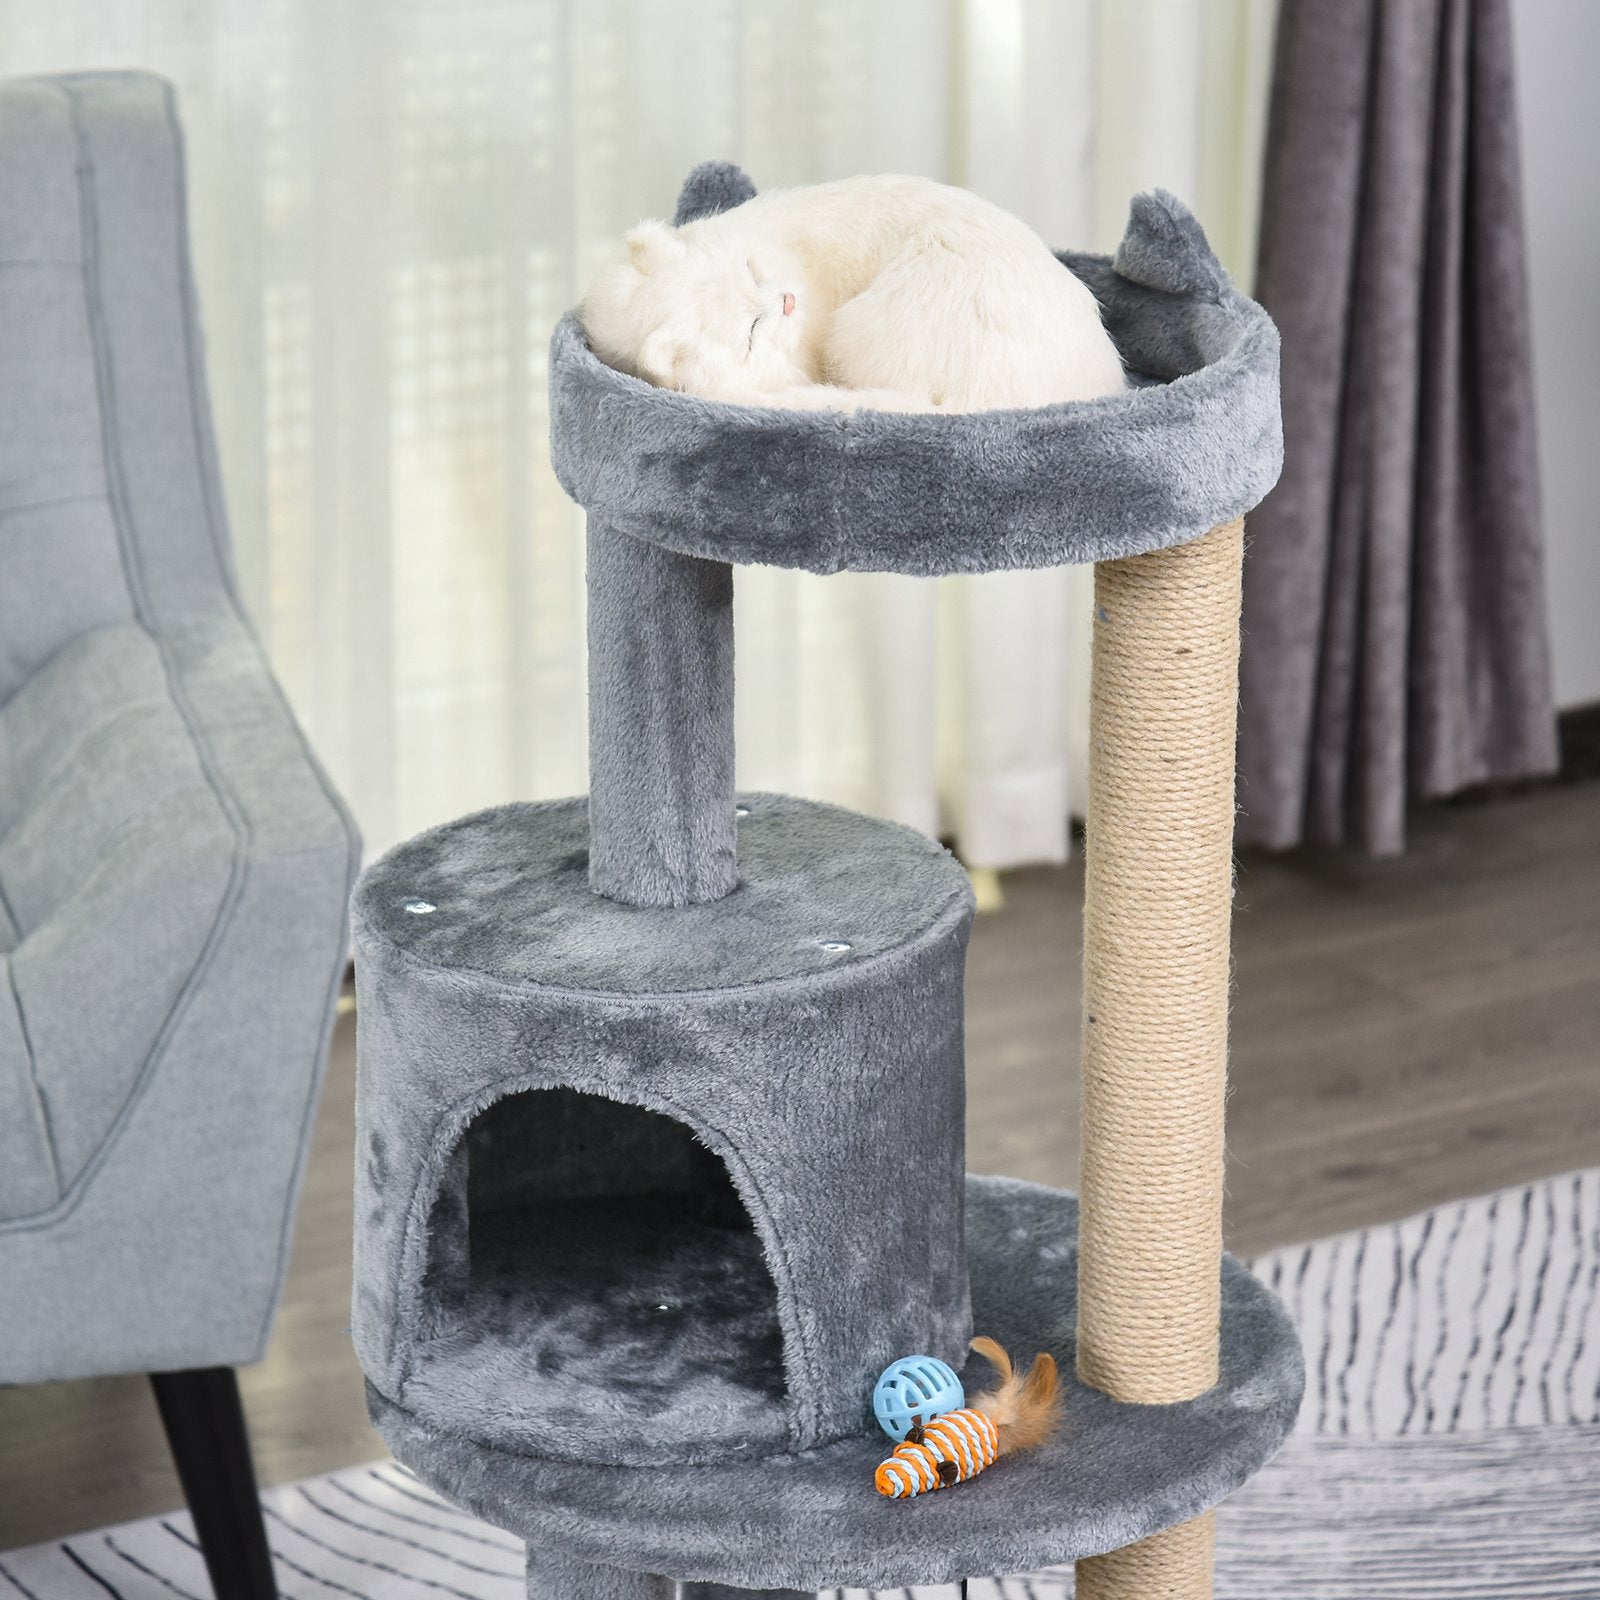 PawHut 3-Tier Deluxe Cat Activity Tree w/ Scratching Posts Ear Perch House Platform Play Ball Plush Fun Toys Exercise Rest Relax Climb Grey - Inspirely